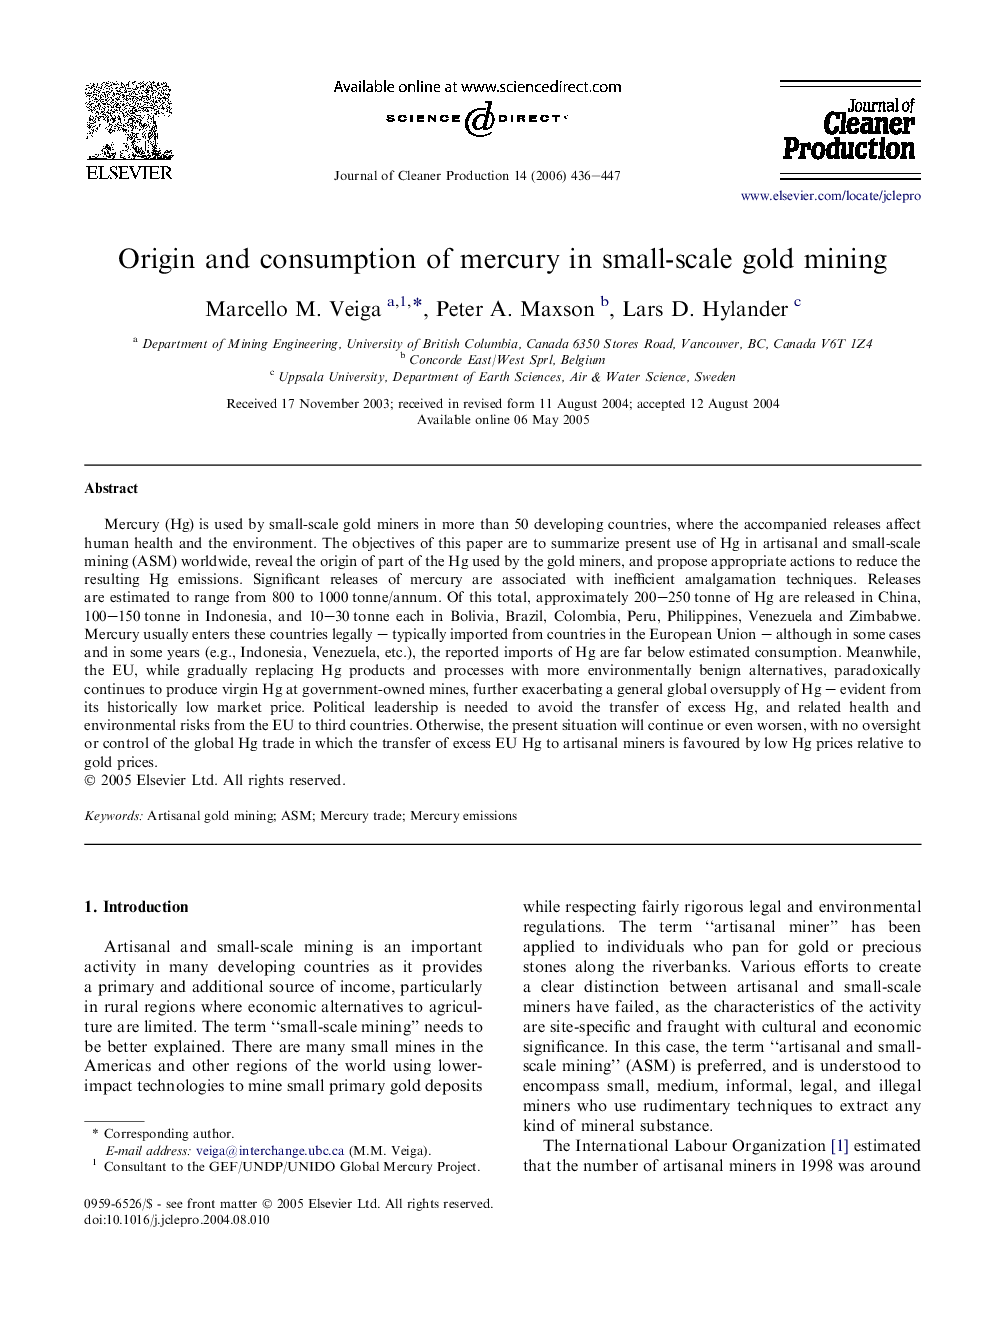 Origin and consumption of mercury in small-scale gold mining